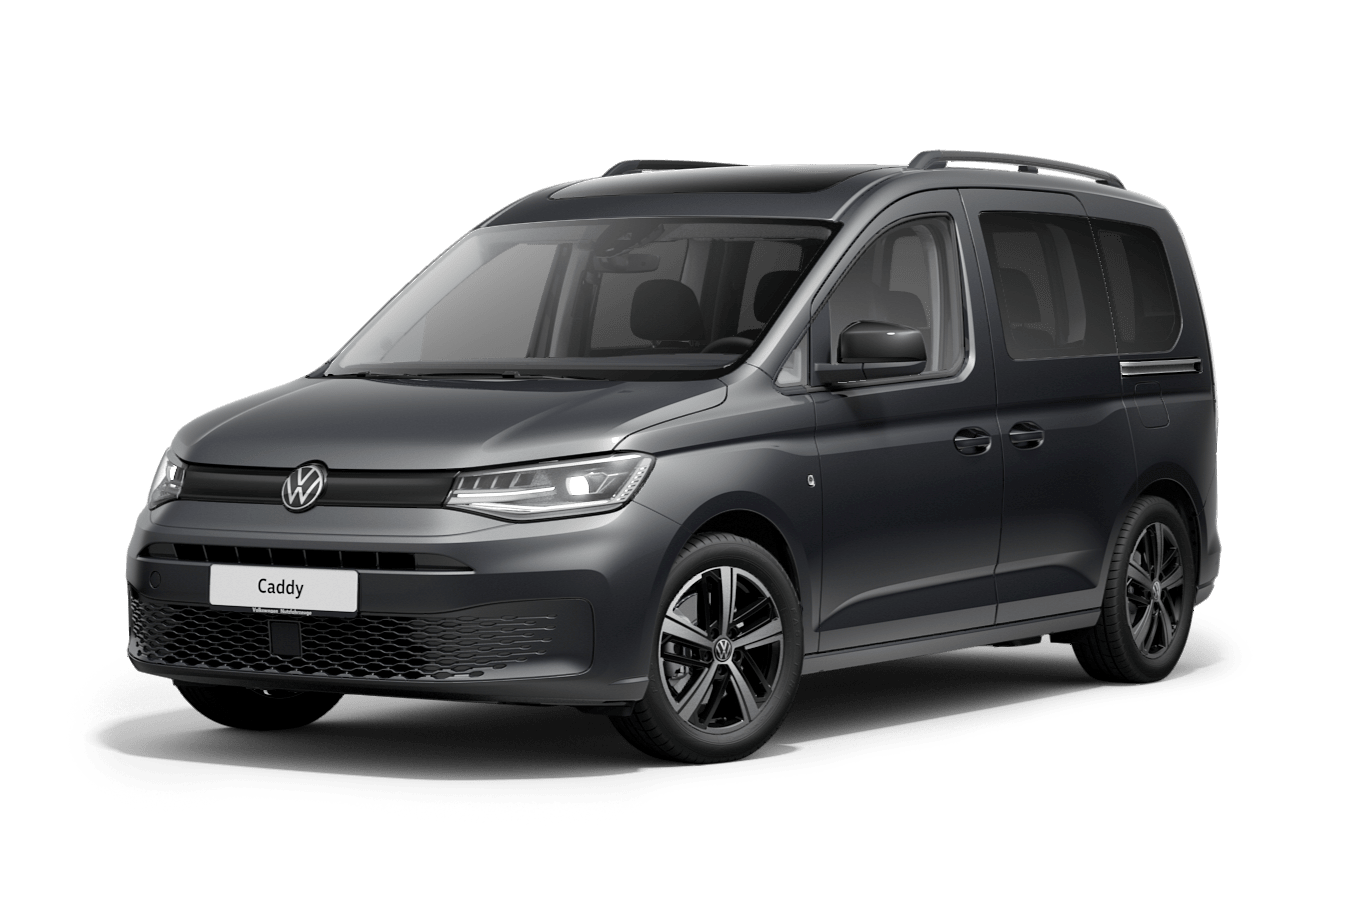 https://carsguide-res.cloudinary.com/image/upload/f_auto,fl_lossy,q_auto,t_default/v1/editorial/volkswagen-caddy-my22-index-1.png